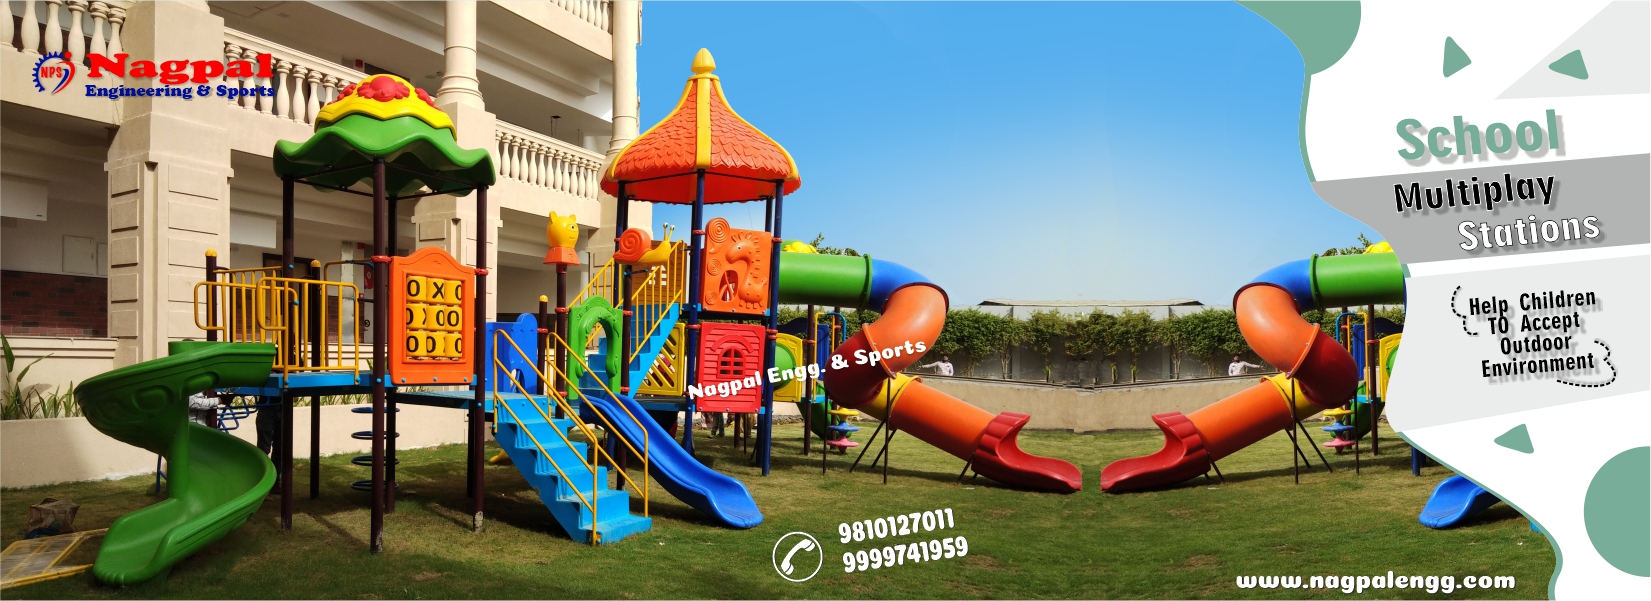 Roto Multiplay System Manufacturers, Exporters & Suppliers in Siwan